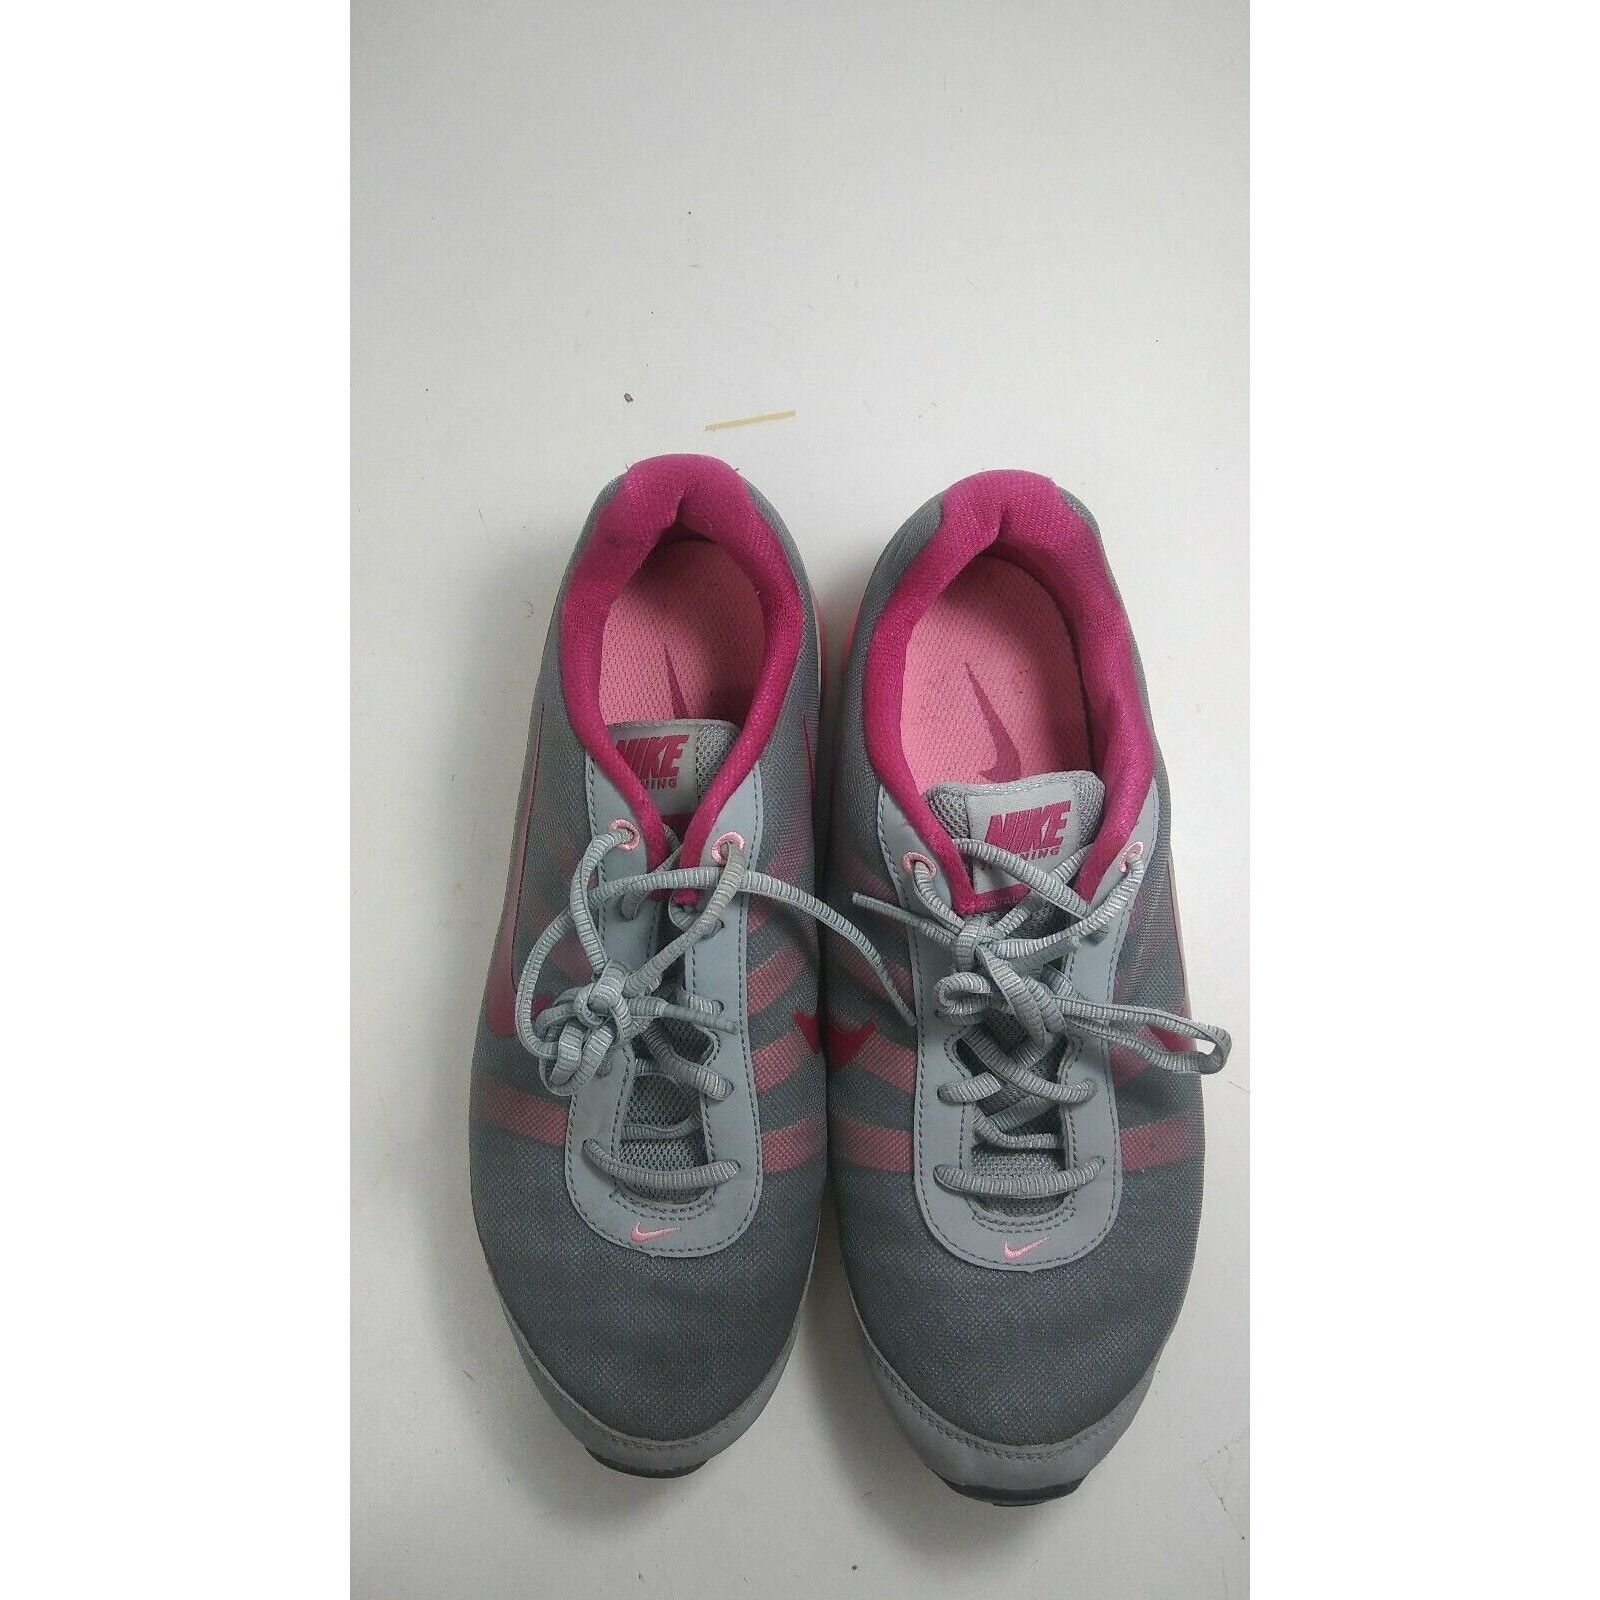 Primary image for NIKE AIR Total Core TR Pink & Gray Training Running Shoes 488111-008 Womens 9